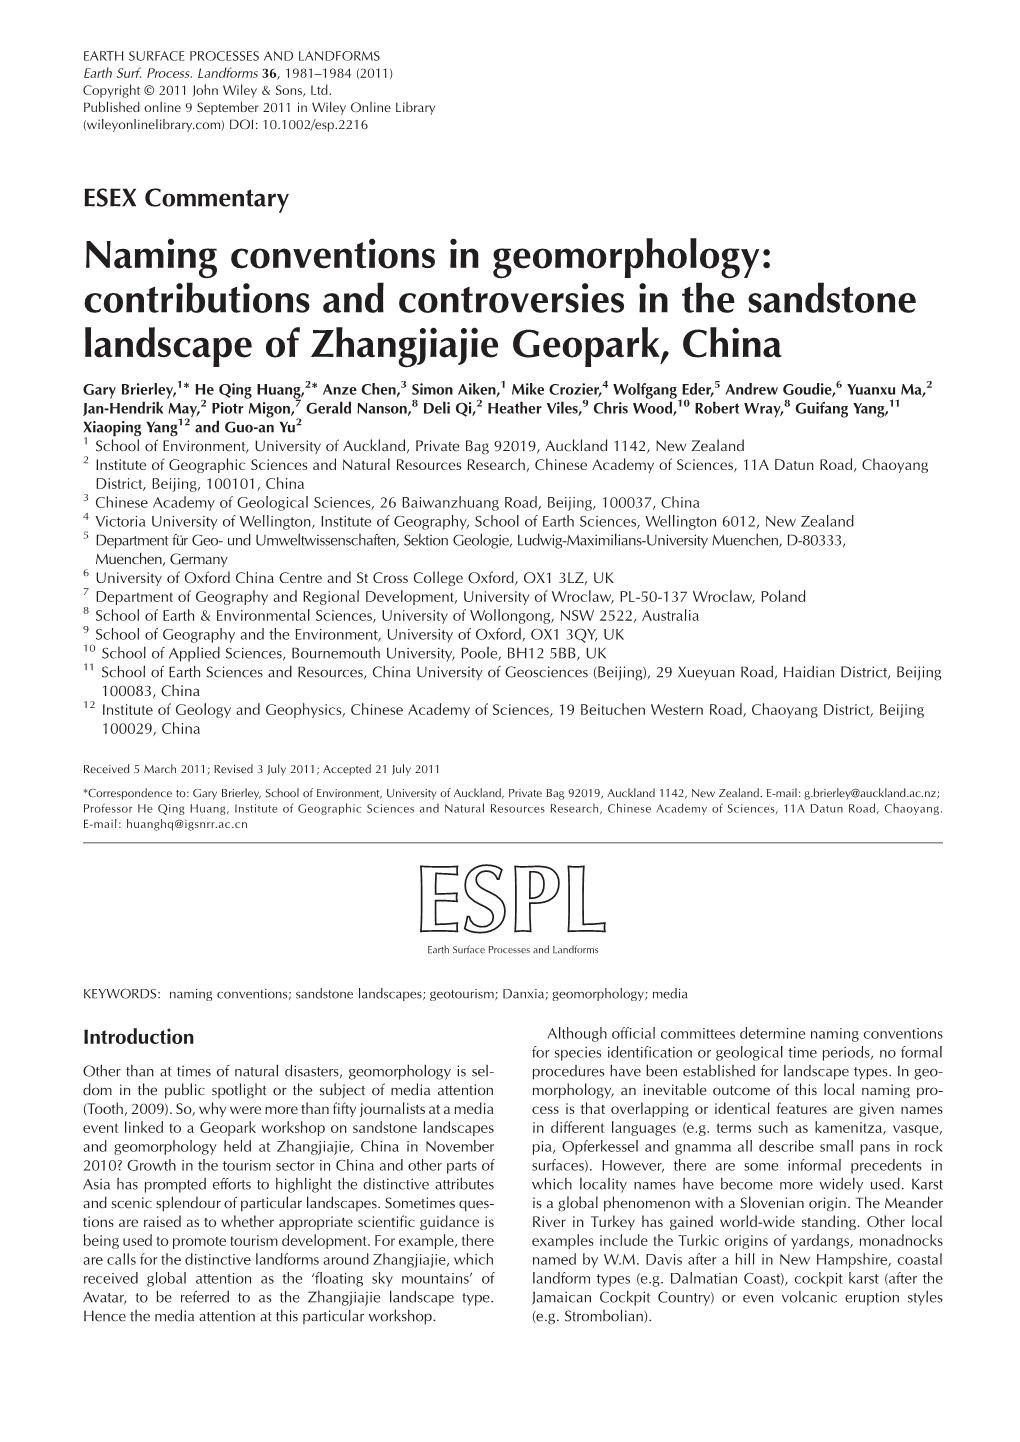 Naming Conventions in Geomorphology: Contributions and Controversies in the Sandstone Landscape of Zhangjiajie Geopark, China